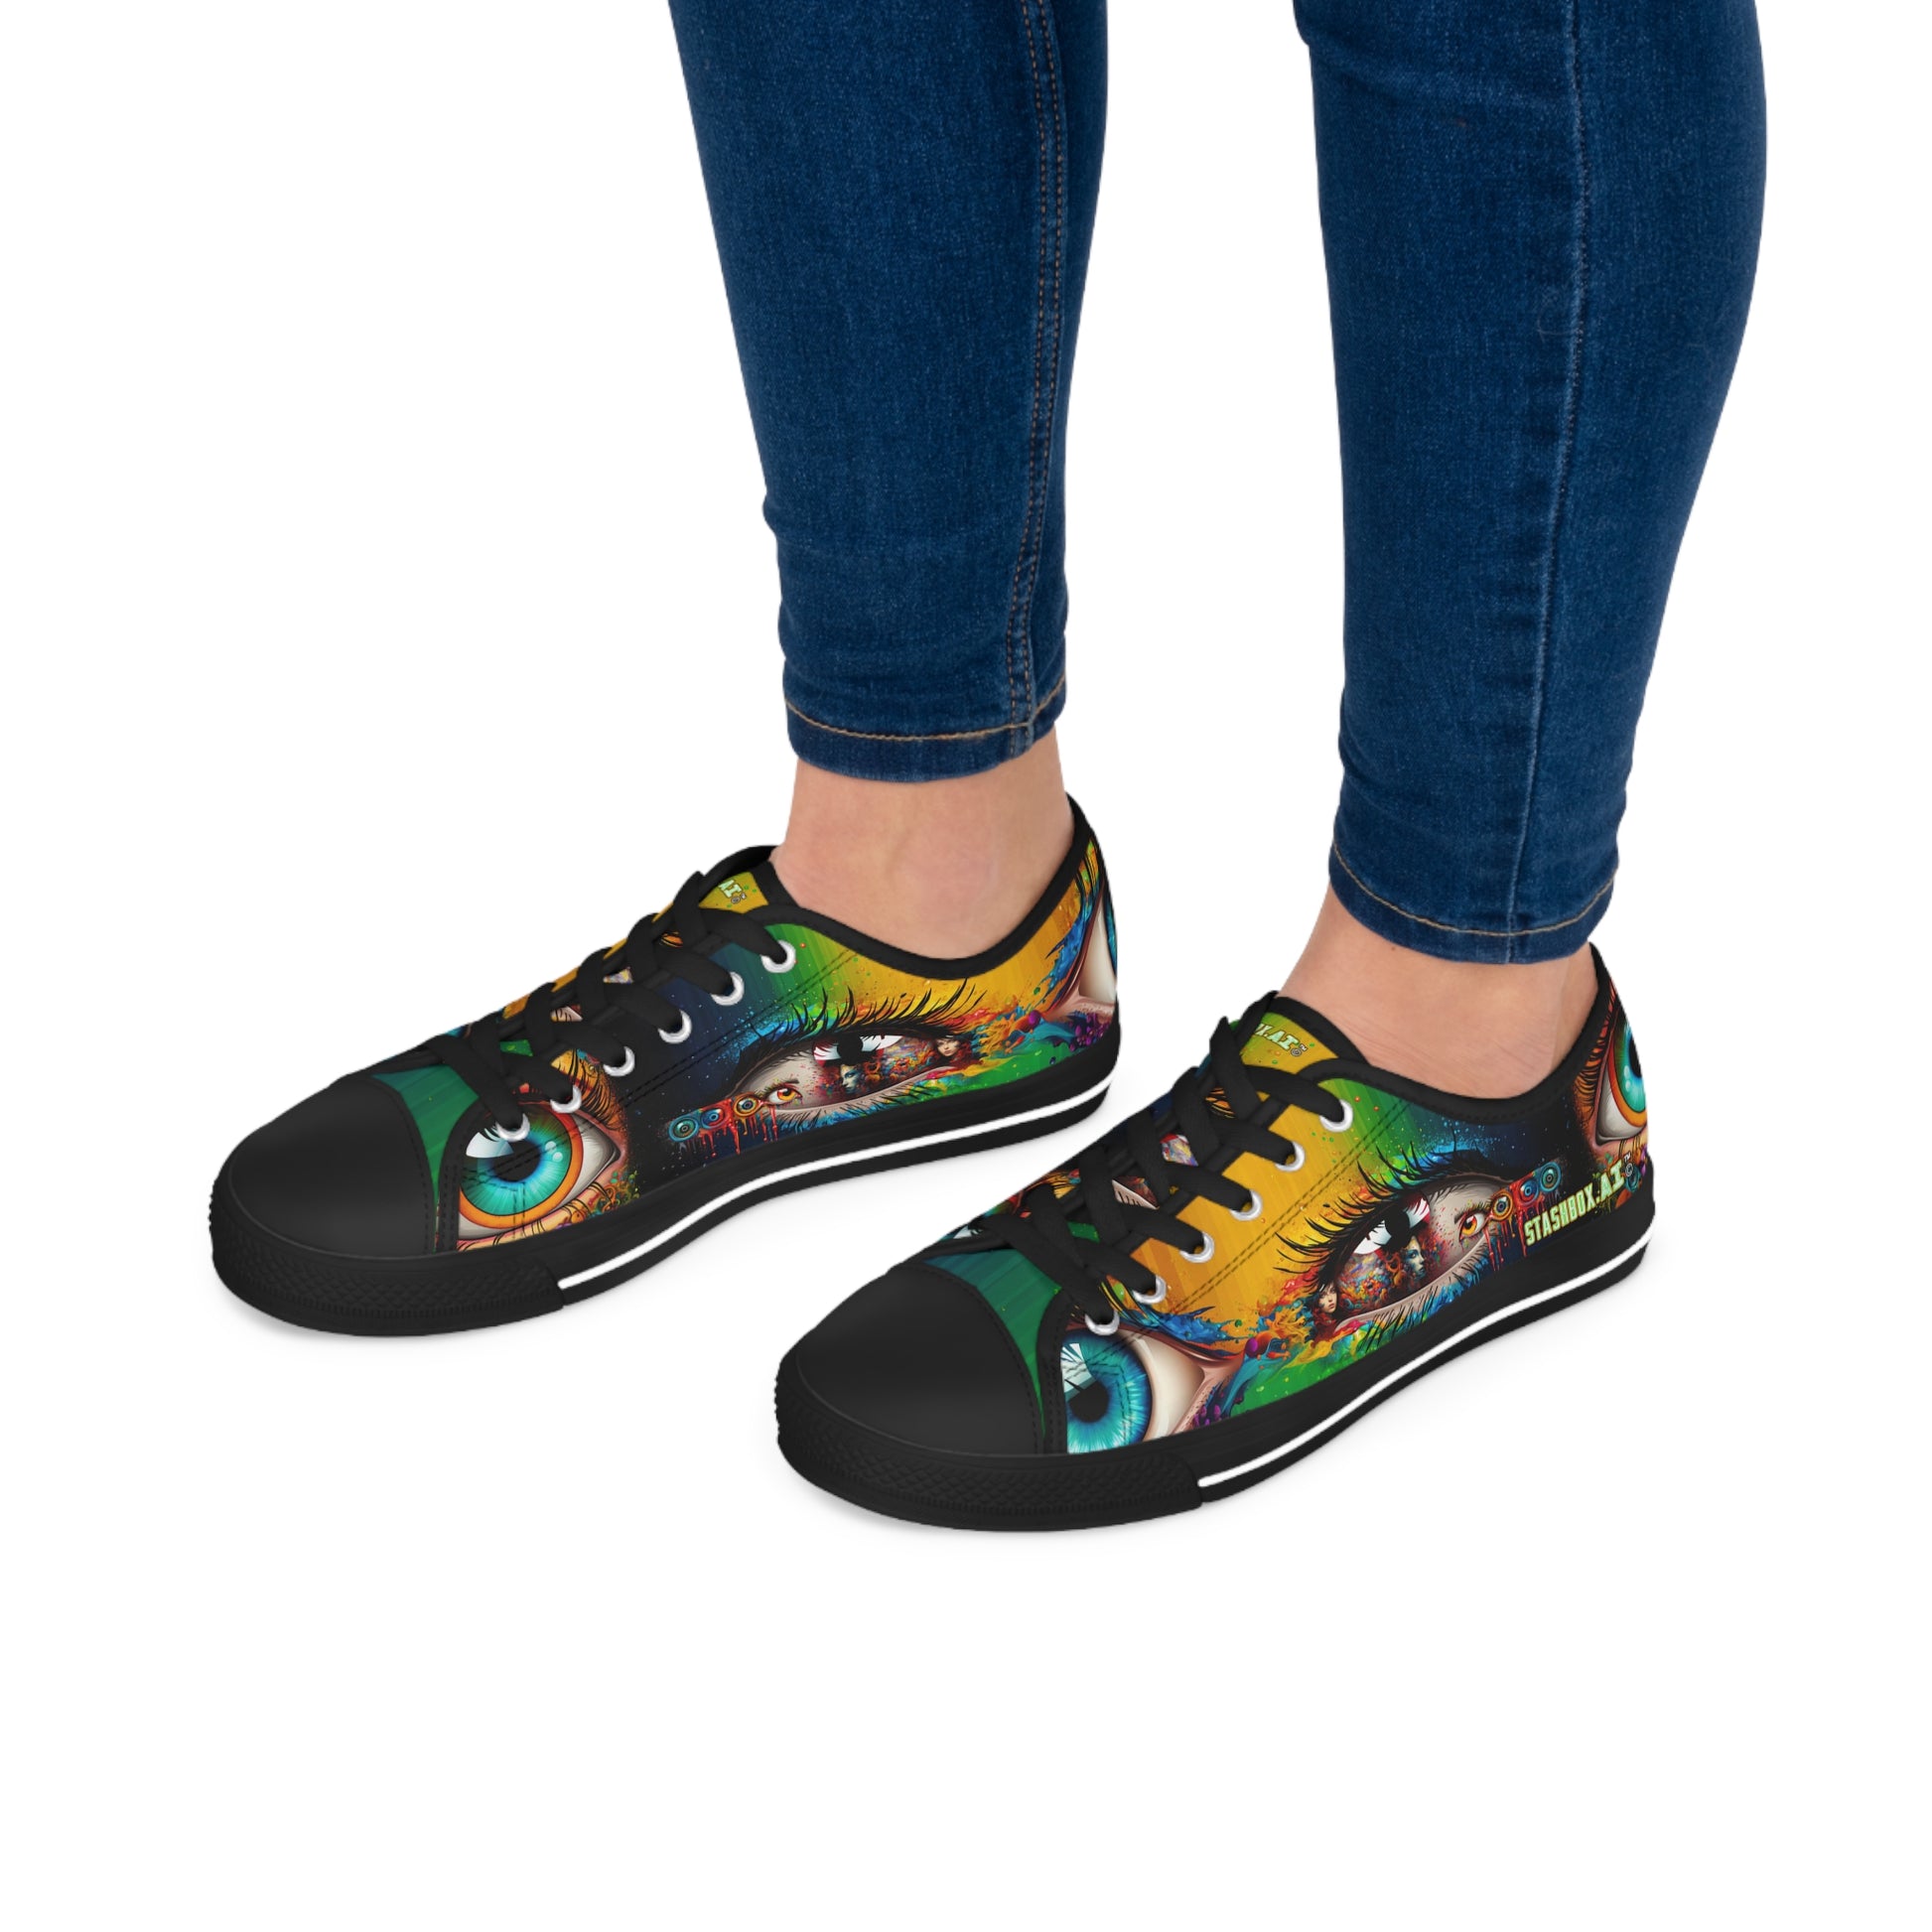 Unique Low Top Sneakers - Stashbox Psychedelic Design - #EyeCatchyShoes #FunkyFootwear #StashboxCreations